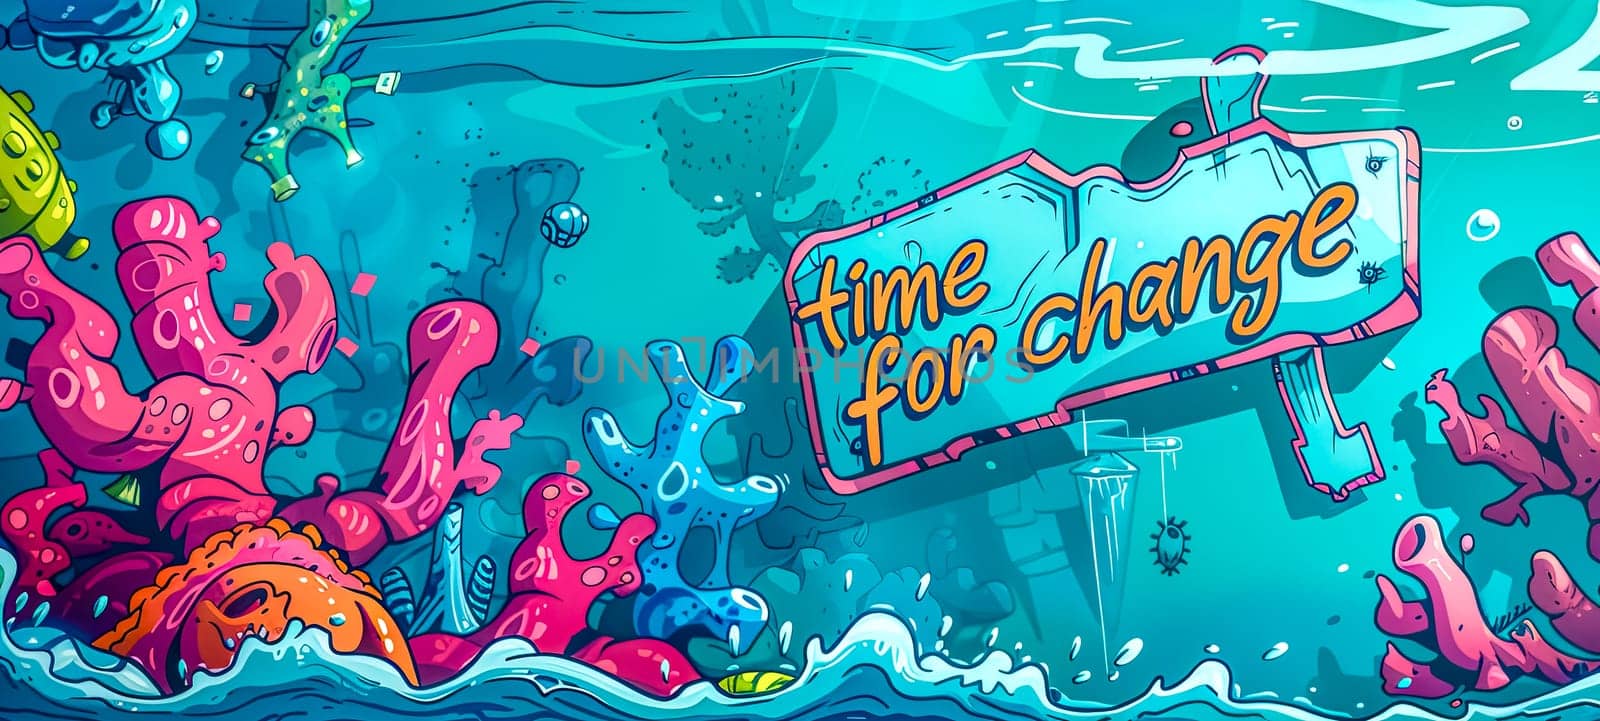 Vibrant underwater scene with time for change sign by Edophoto